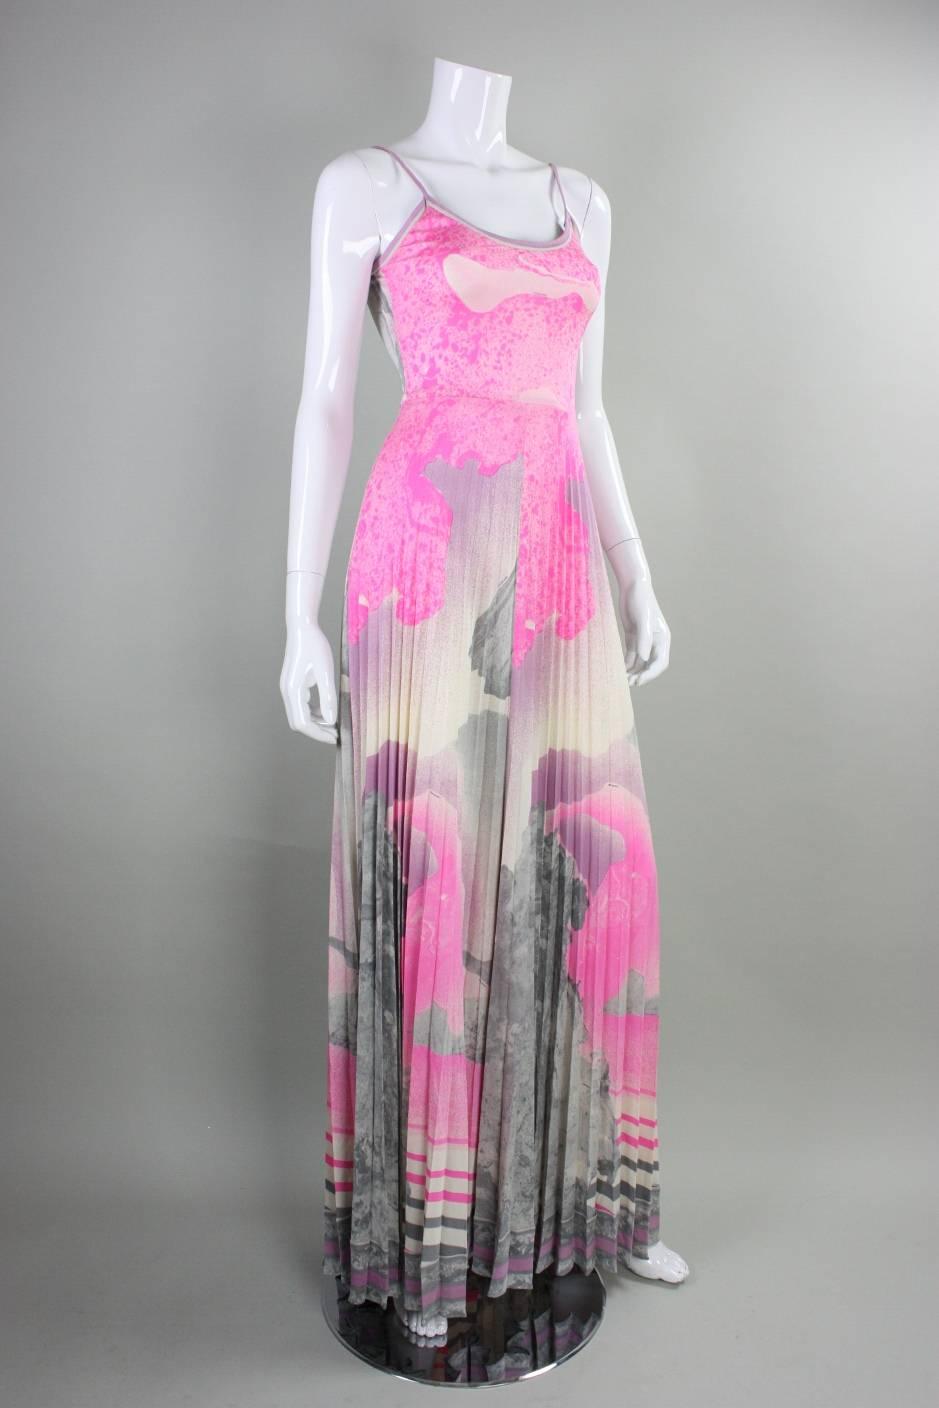 Vintage maxi dress from Leonard Paris dates to the 1970's and is made of matte jersey with an abstracted print in pink and gray.  Fitted bodice has scoop neckline and narrow straps.  Full-length skirt features narrow vertical pleats.  Side zippered